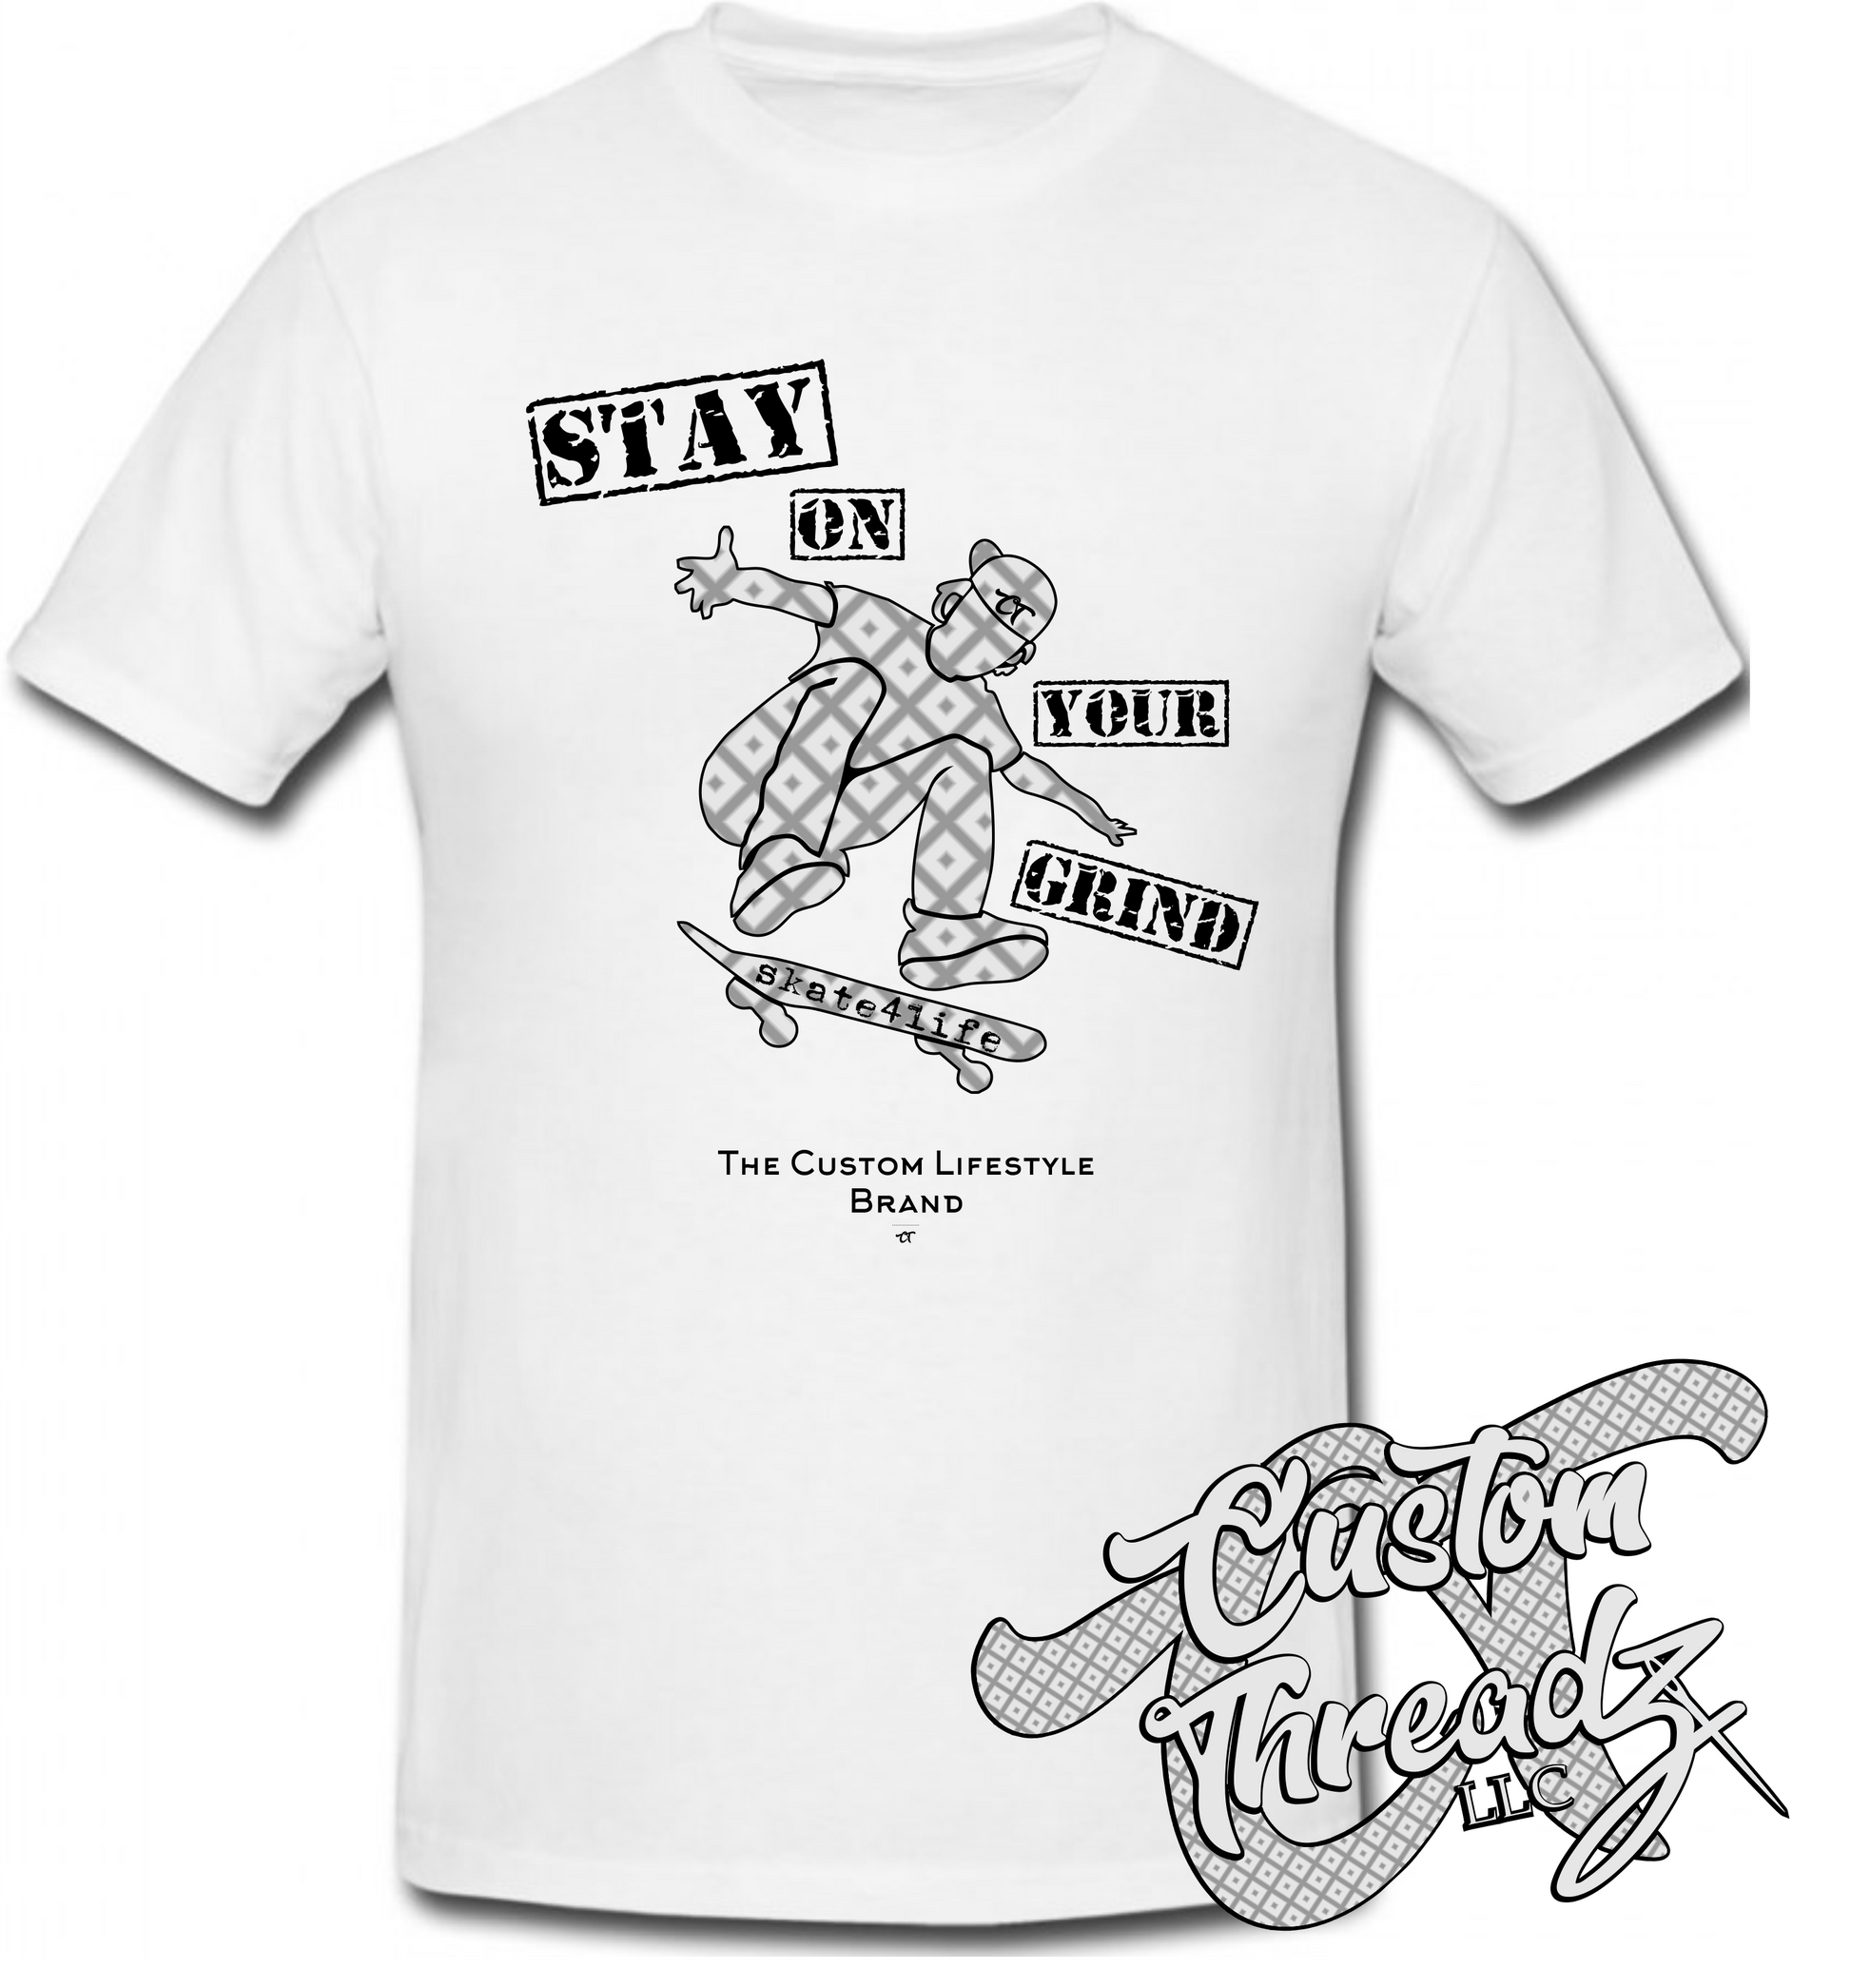 white cotton t-shirt stay on your grind skate